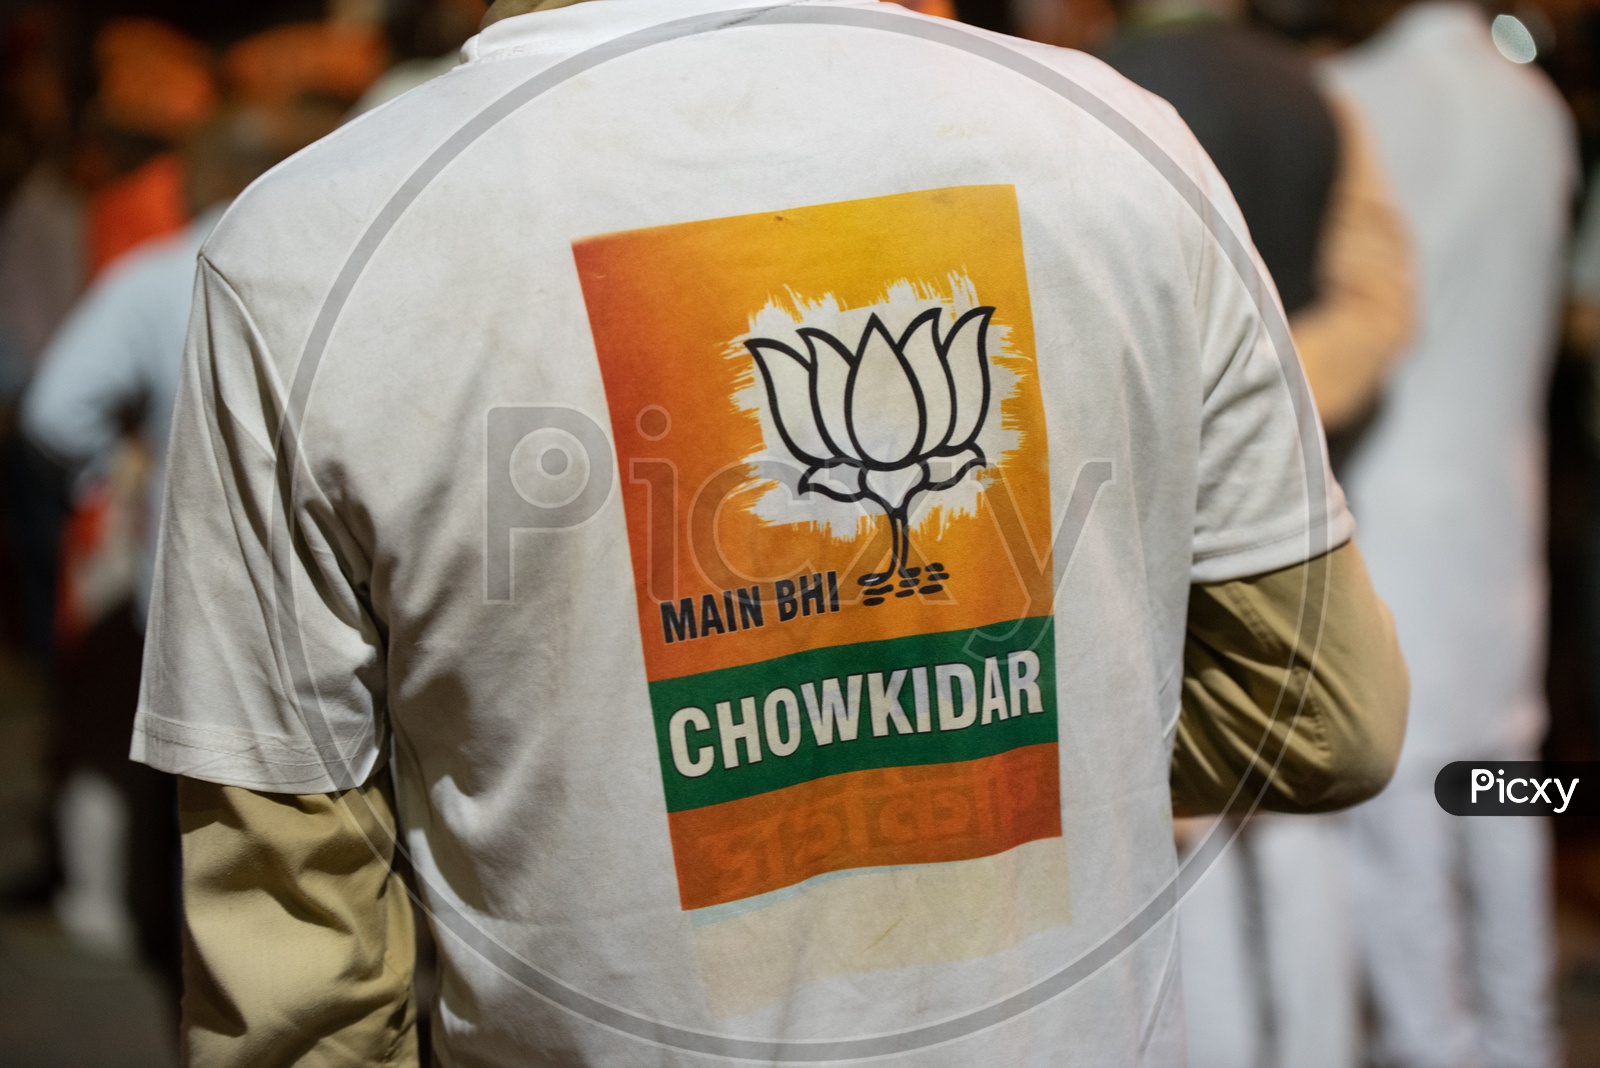 BJP Party Workers Or Supporters  Wearing Main Bhi Chowkidar  TShirts  During Election Campaigns Or  Party Meetings